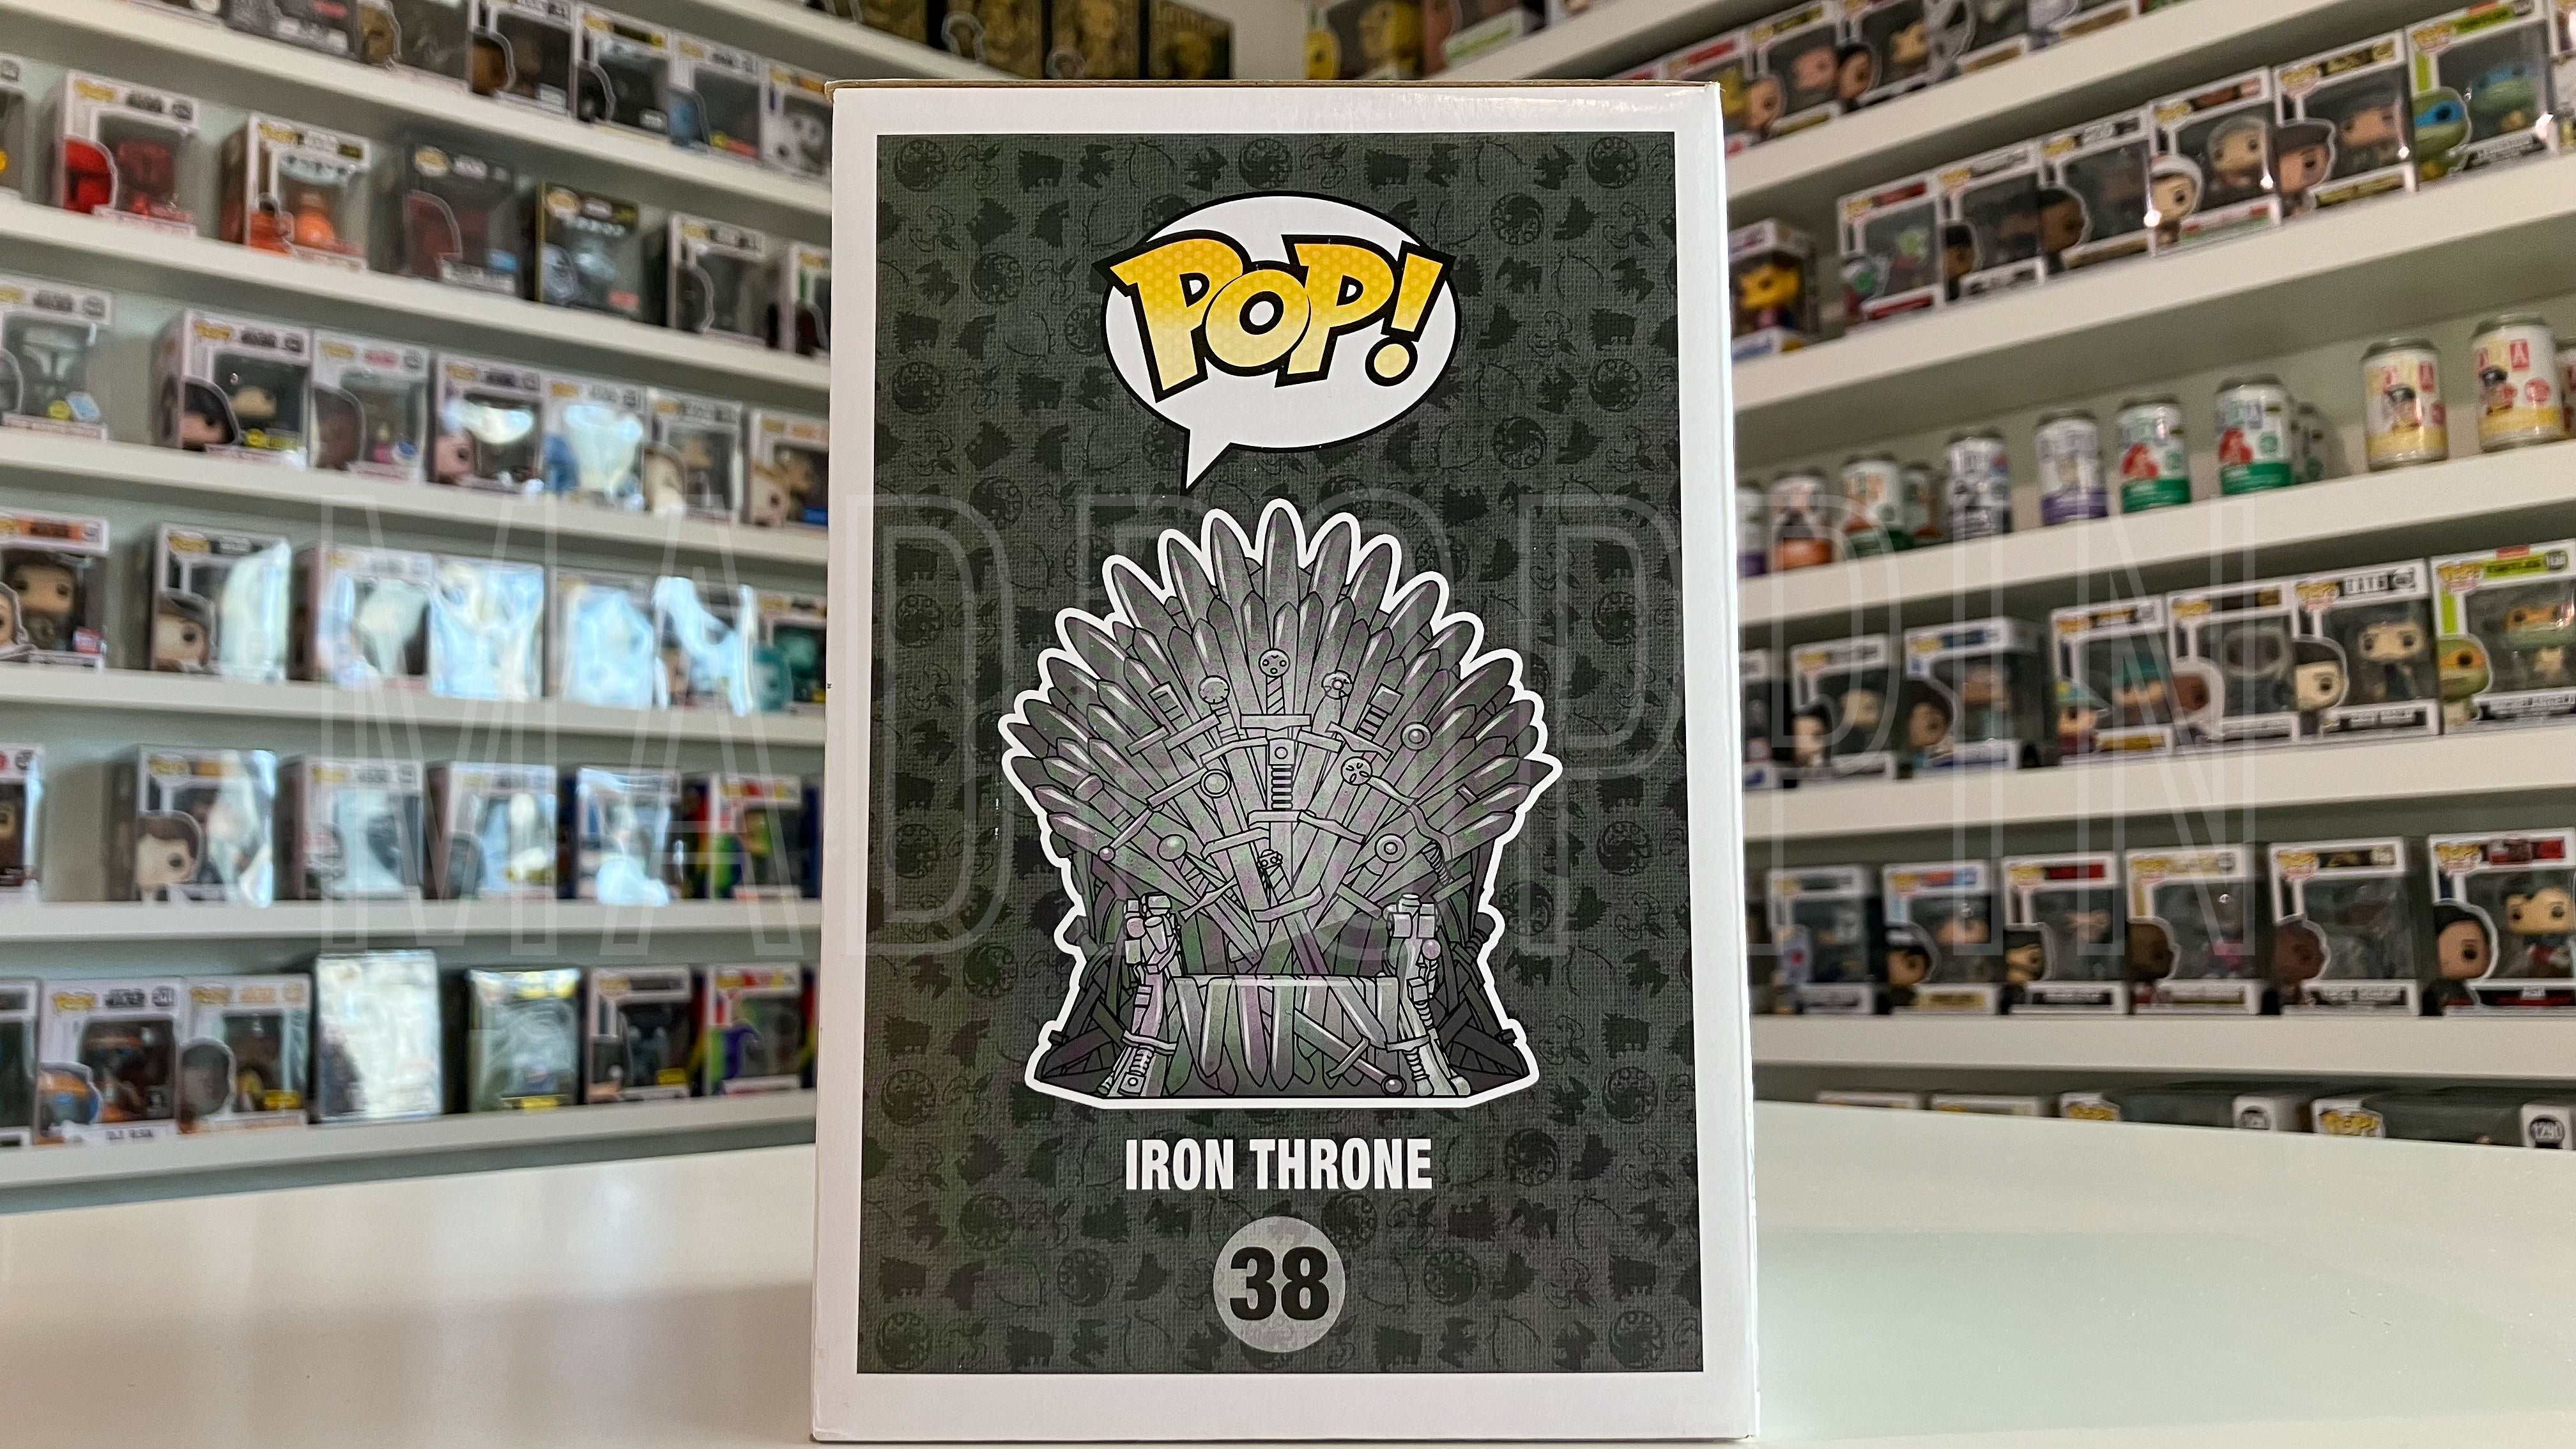 Funko POP! HBO Game of Thrones Iron Throne NYCC Limited Edition #38